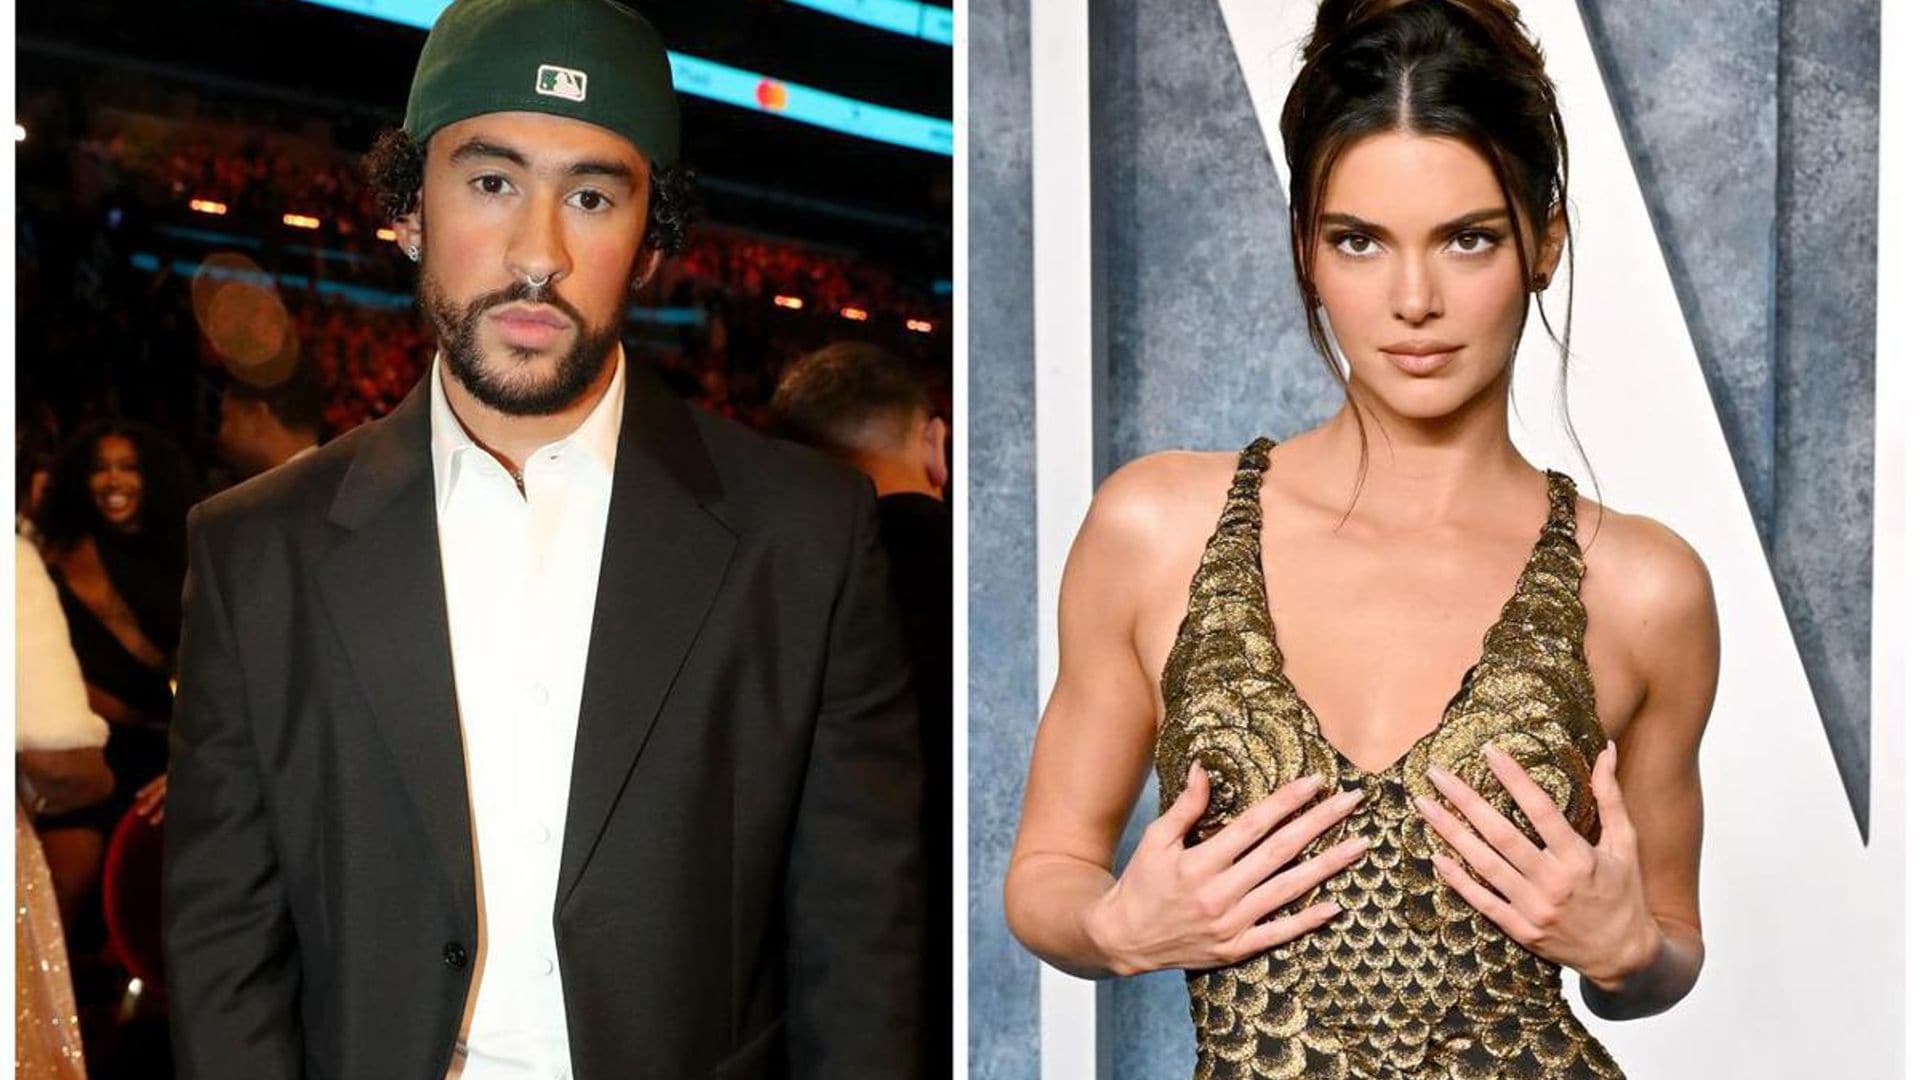 Bad Bunny and Kendall Jenner leave an Oscar party together